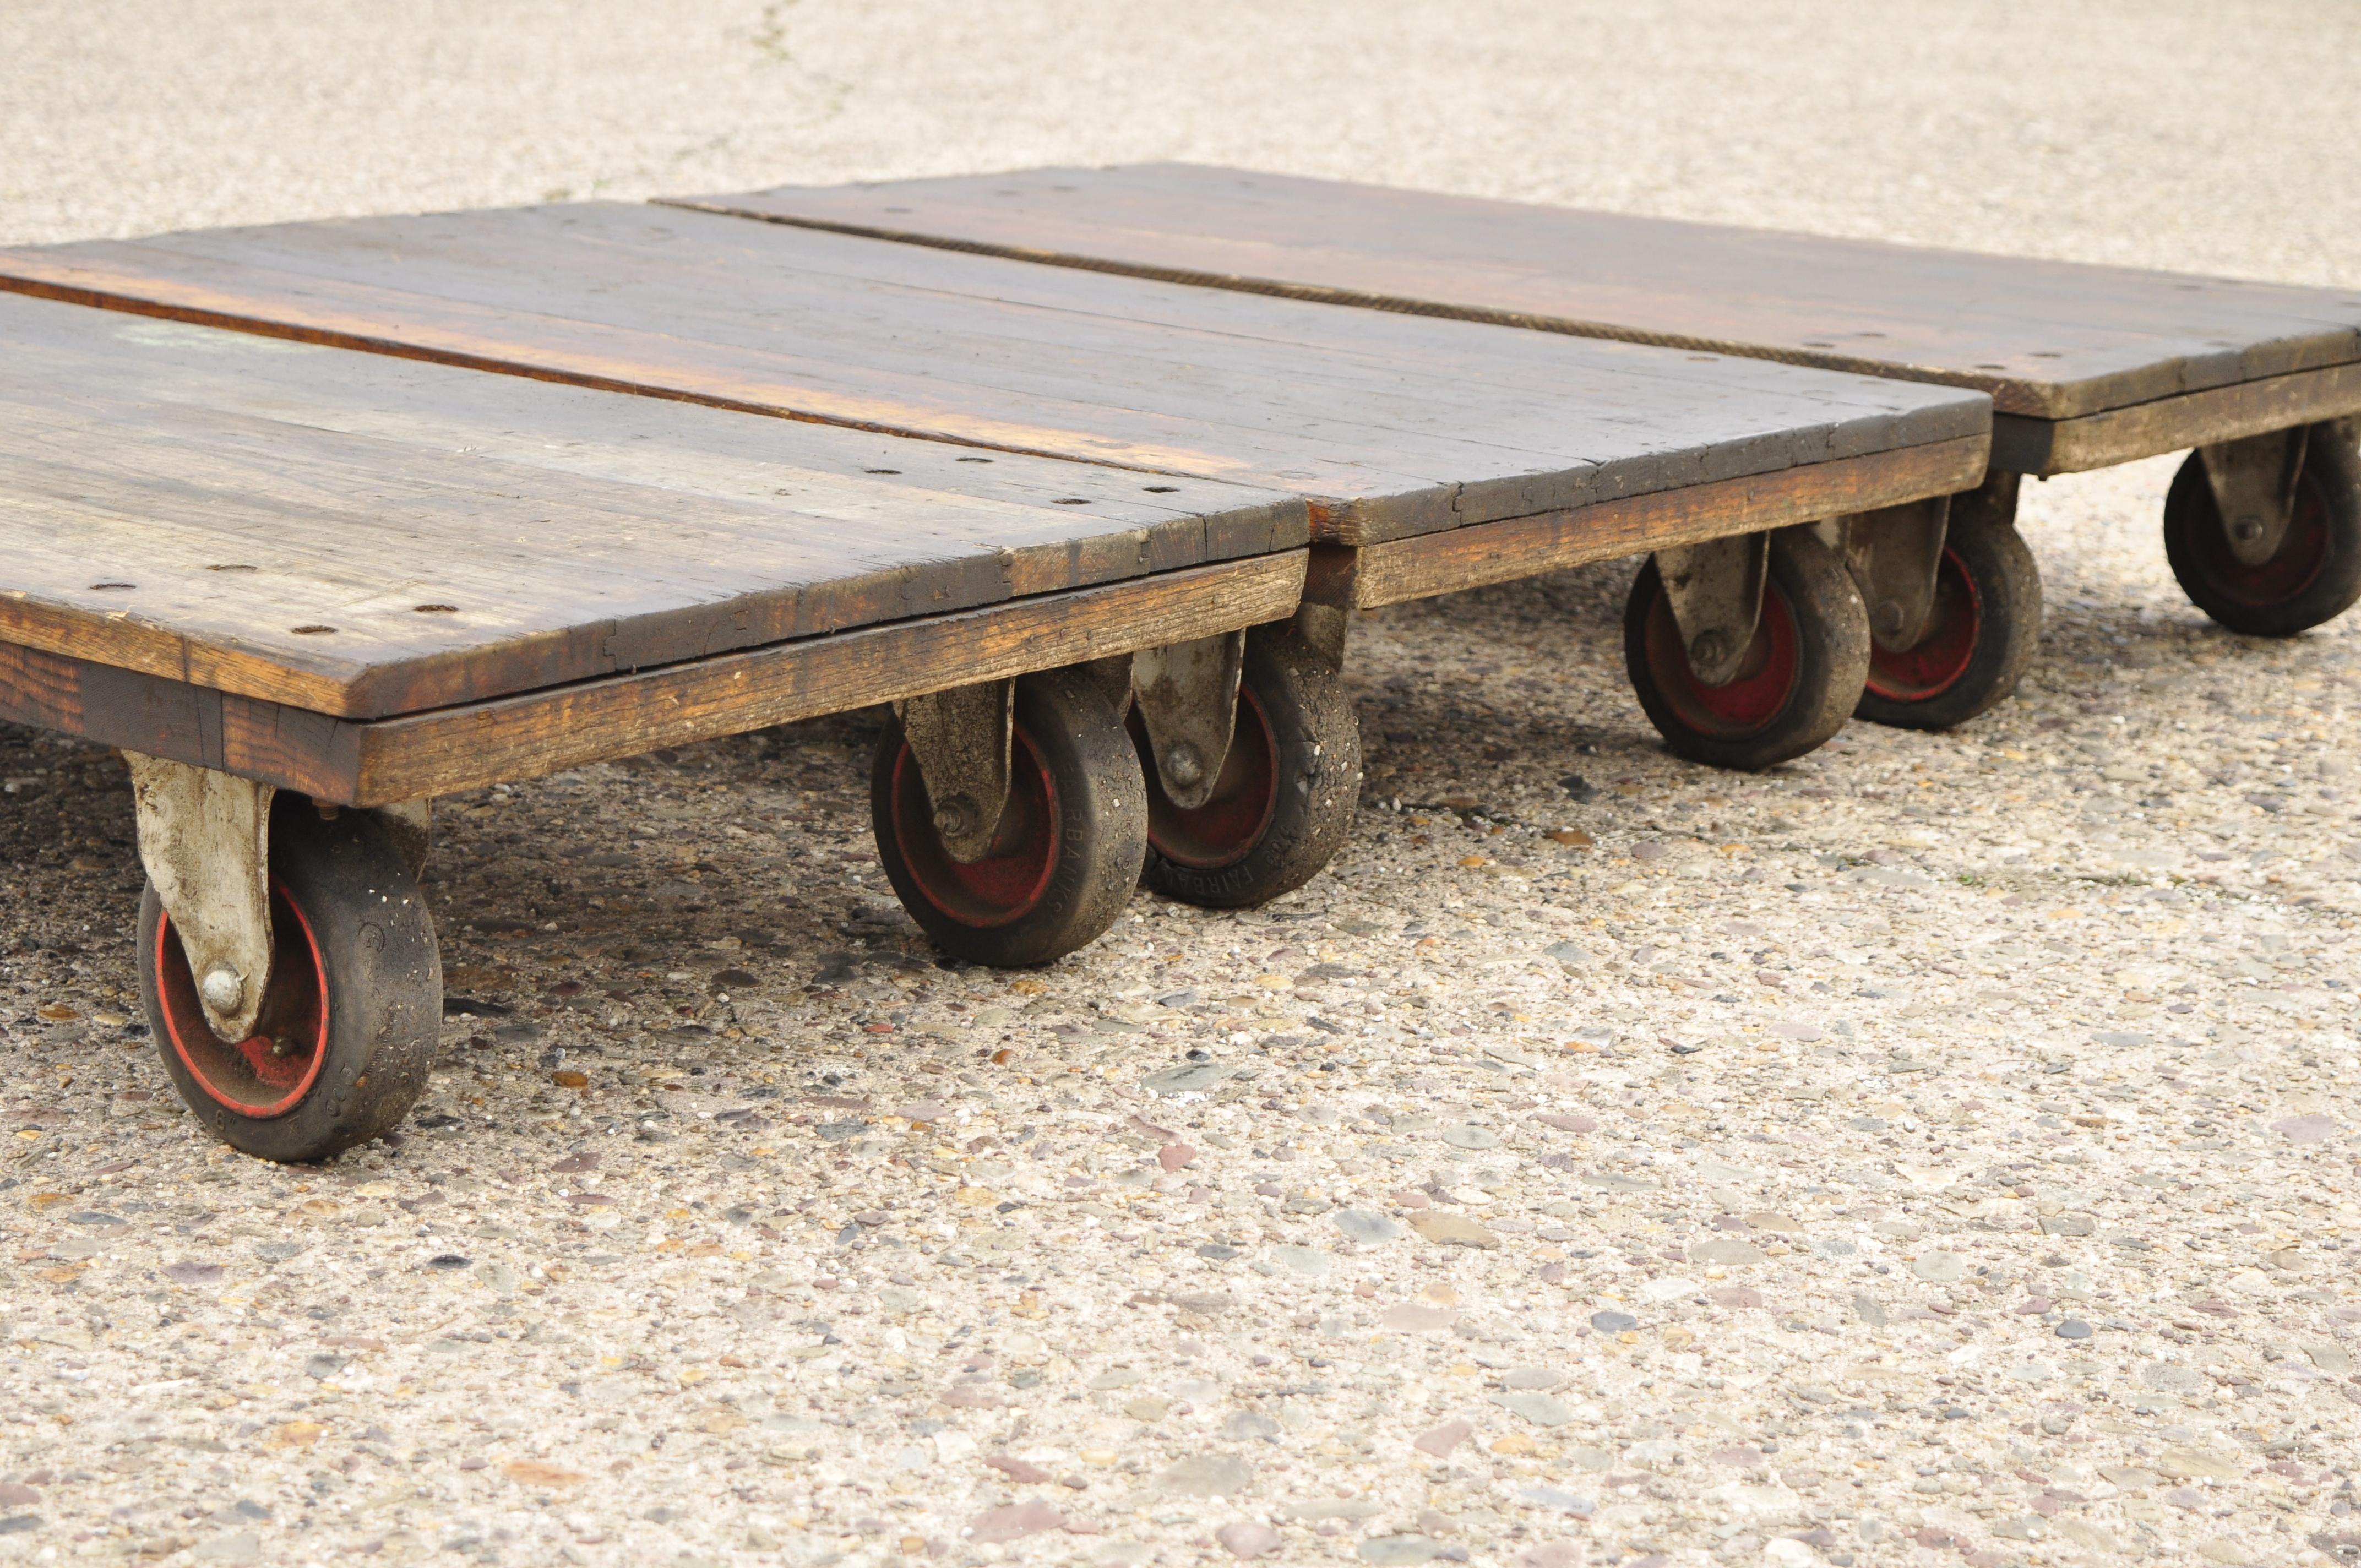 Vintage Fairbanks American Industrial Wood & Iron Factory Work Cart Coffee Table For Sale 1